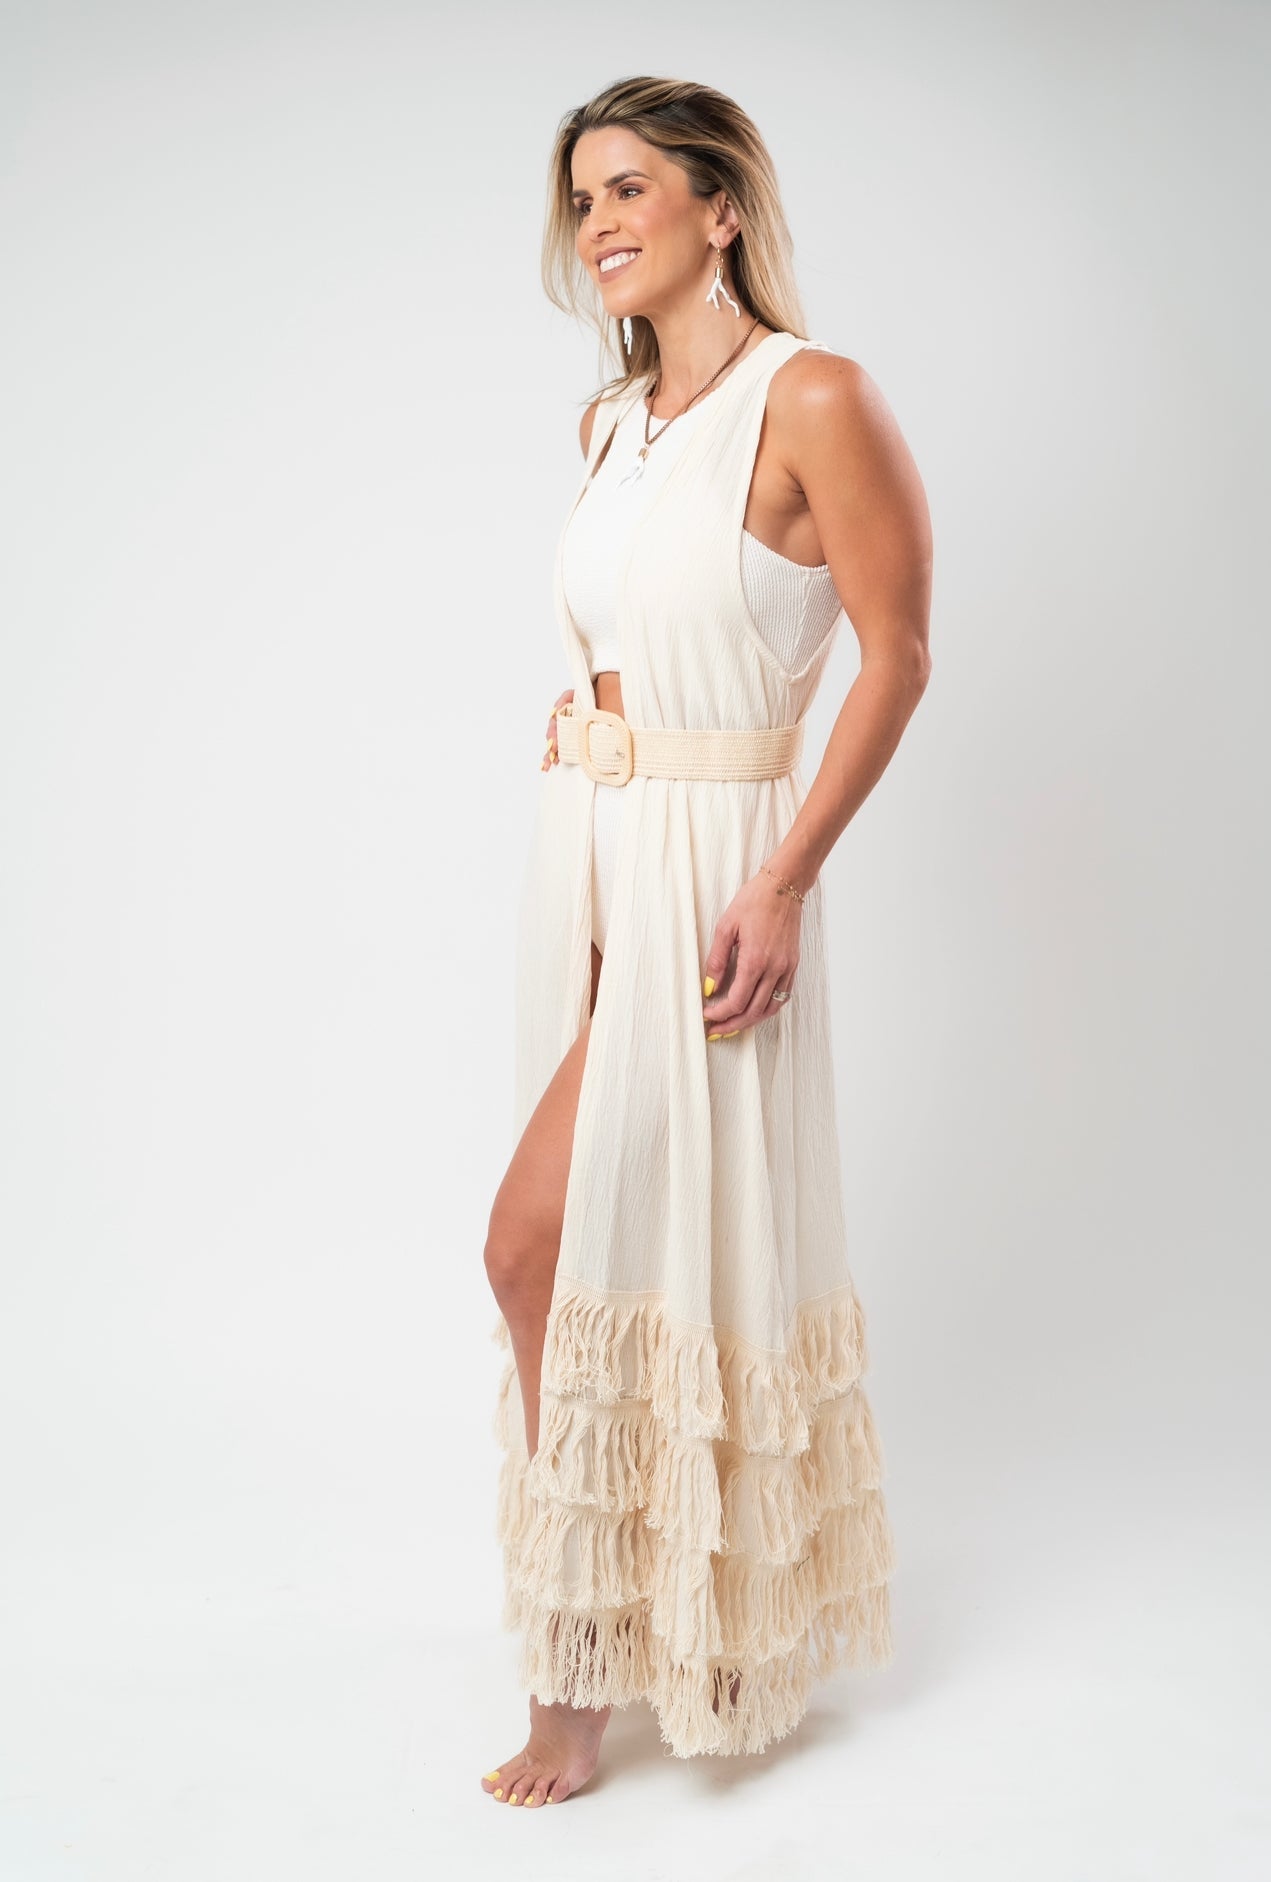 Aguacate Boutique - ISA Fringed Cover With Belt